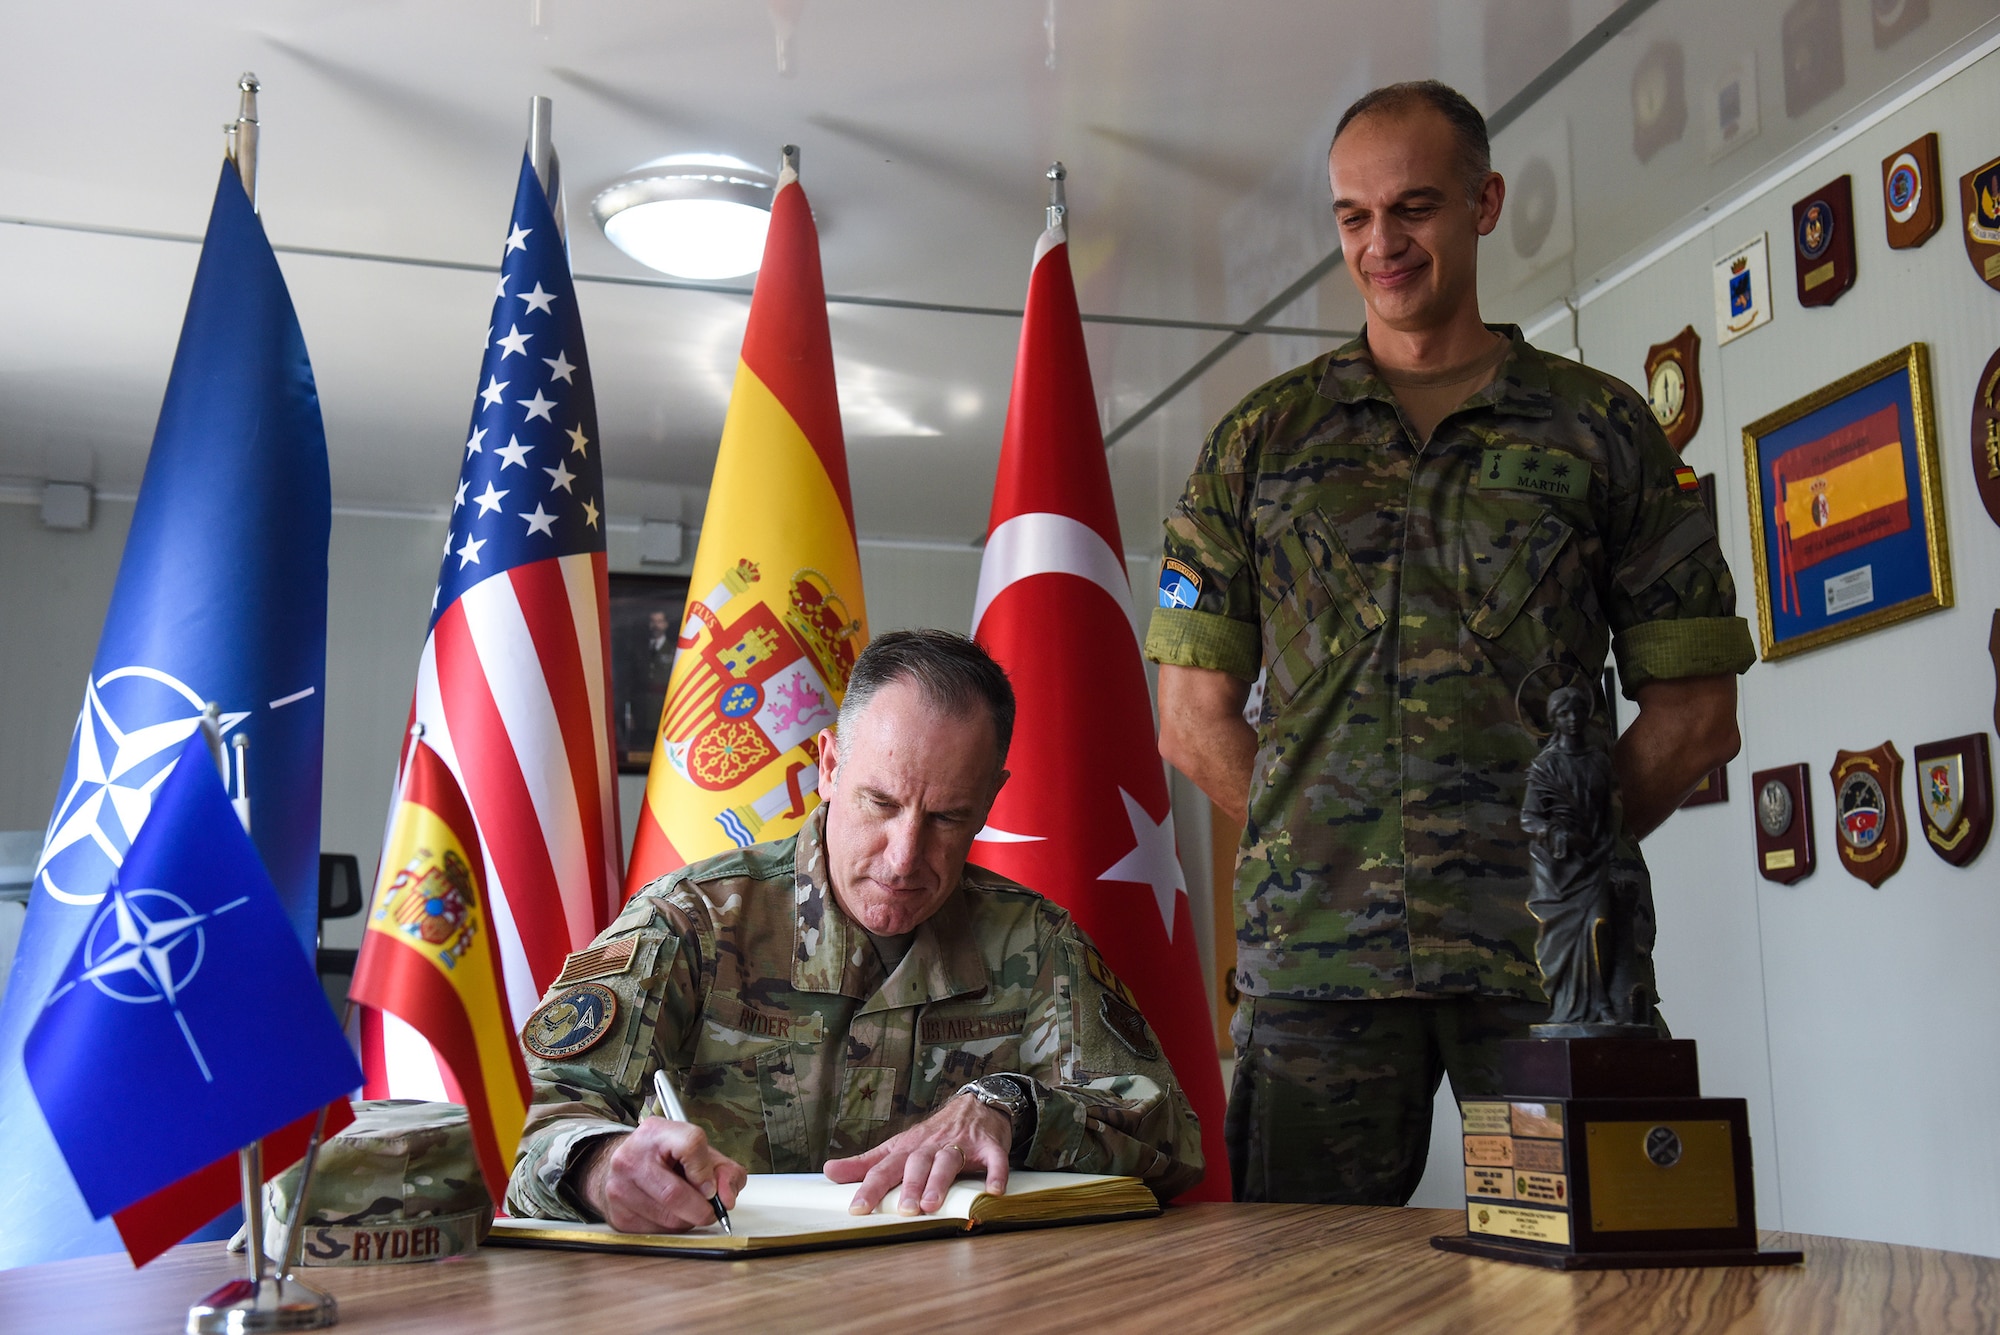 Spanish Army Lt. Col. Sergio Martín Gallego (right), Spanish Patriot Unit commander, looks down as U.S. Brig. Gen. Patrick Ryder, Office of the Secretary of the Air Force director of public affairs, writes a message in the Spanish Battery Compound’s guest book during a visit to Incirlik Air Base, Turkey, Aug. 4, 2022.